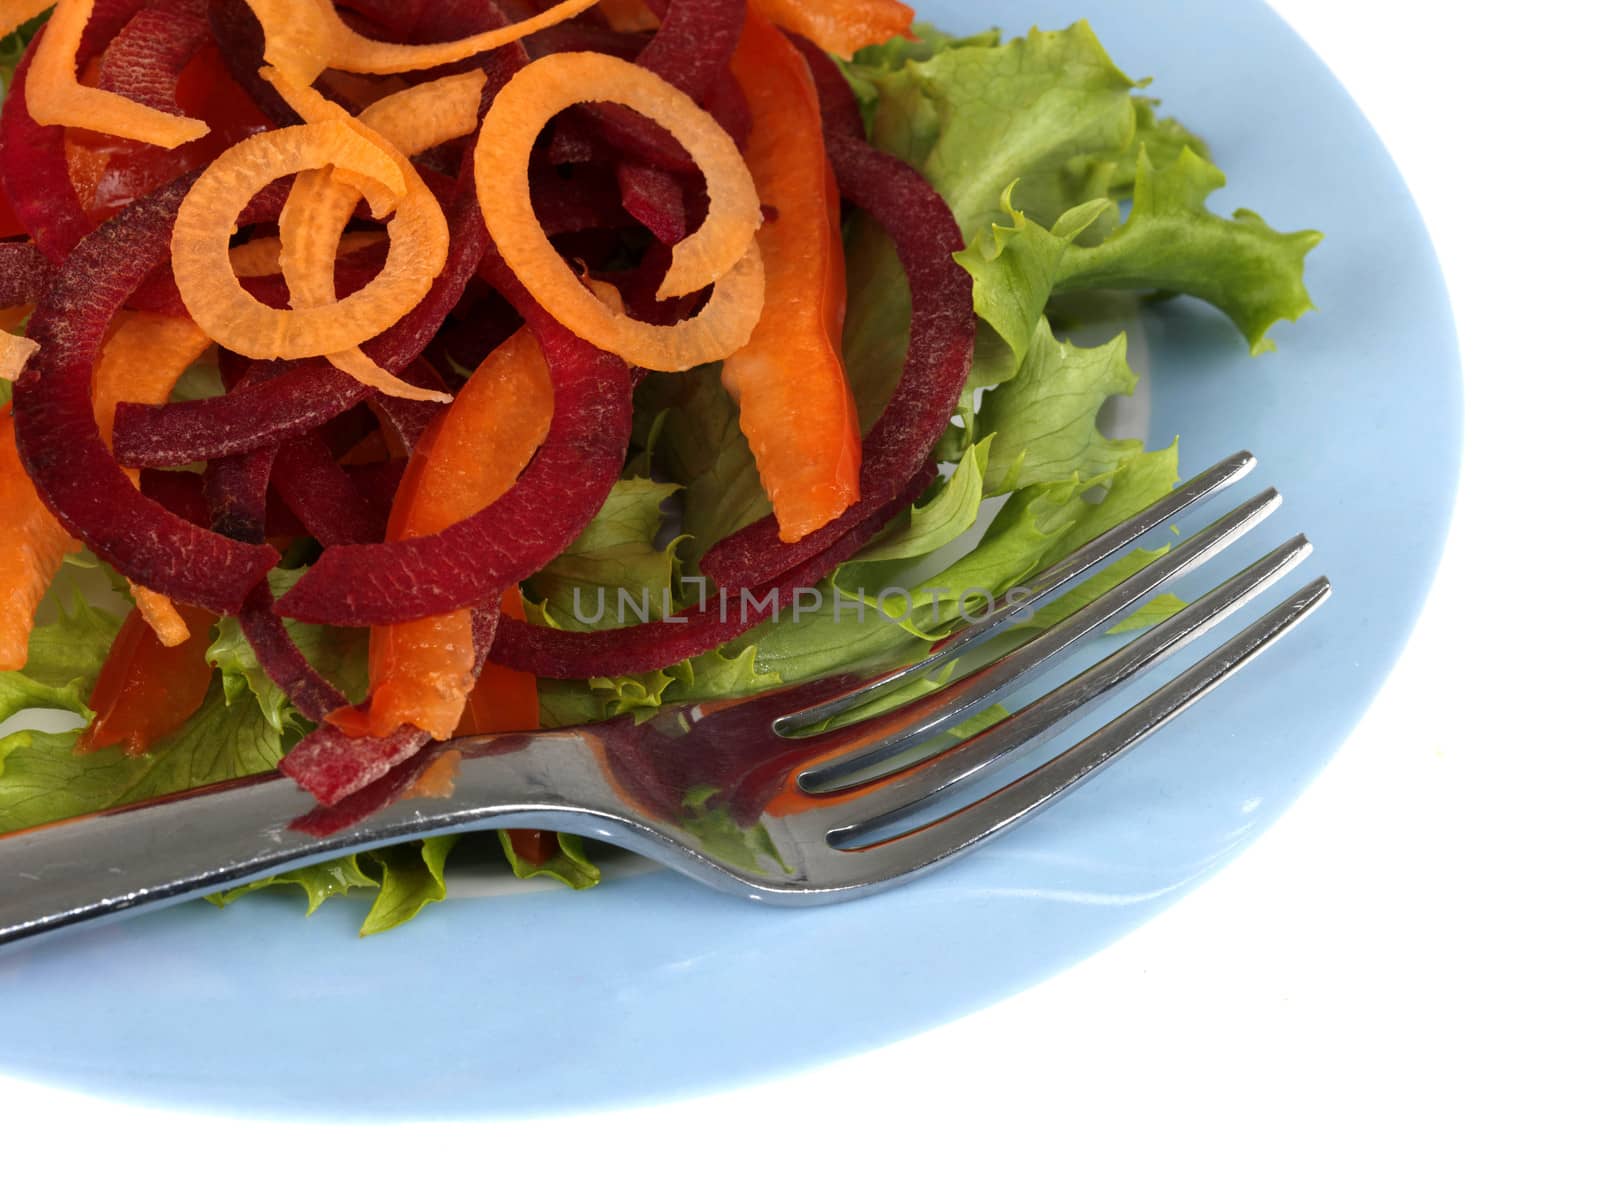 Beetroot and Carrot Salad by Whiteboxmedia